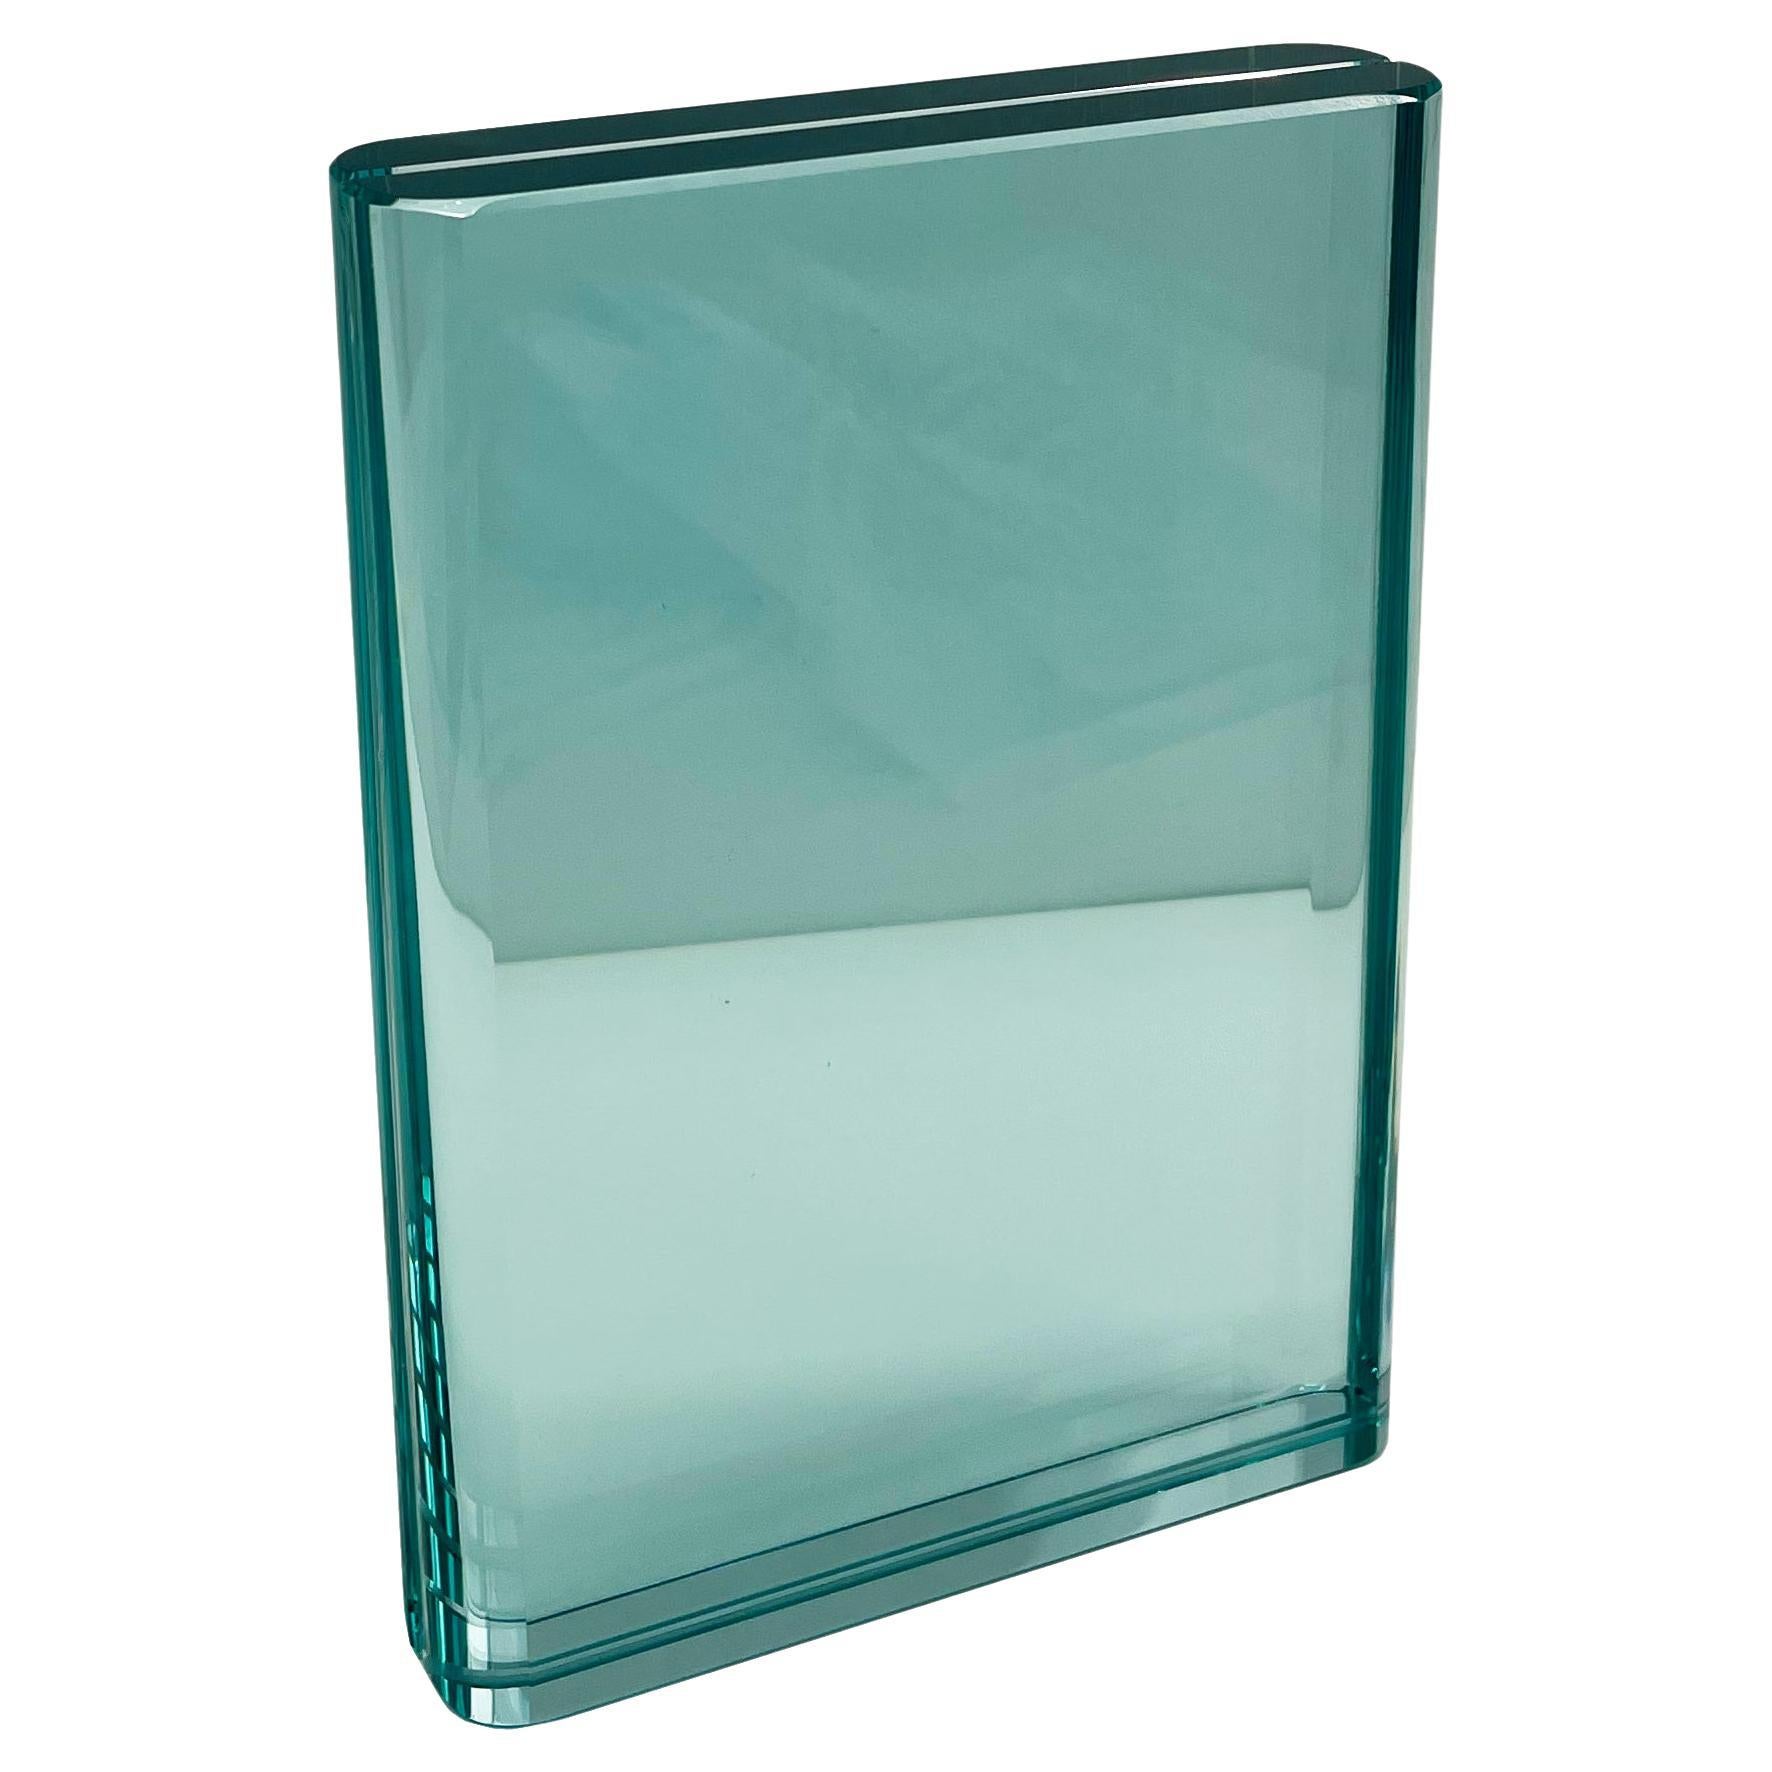 Contemporary Handmade Aquamarine Vertical Crystal Picture Frame by Ghirò Studio